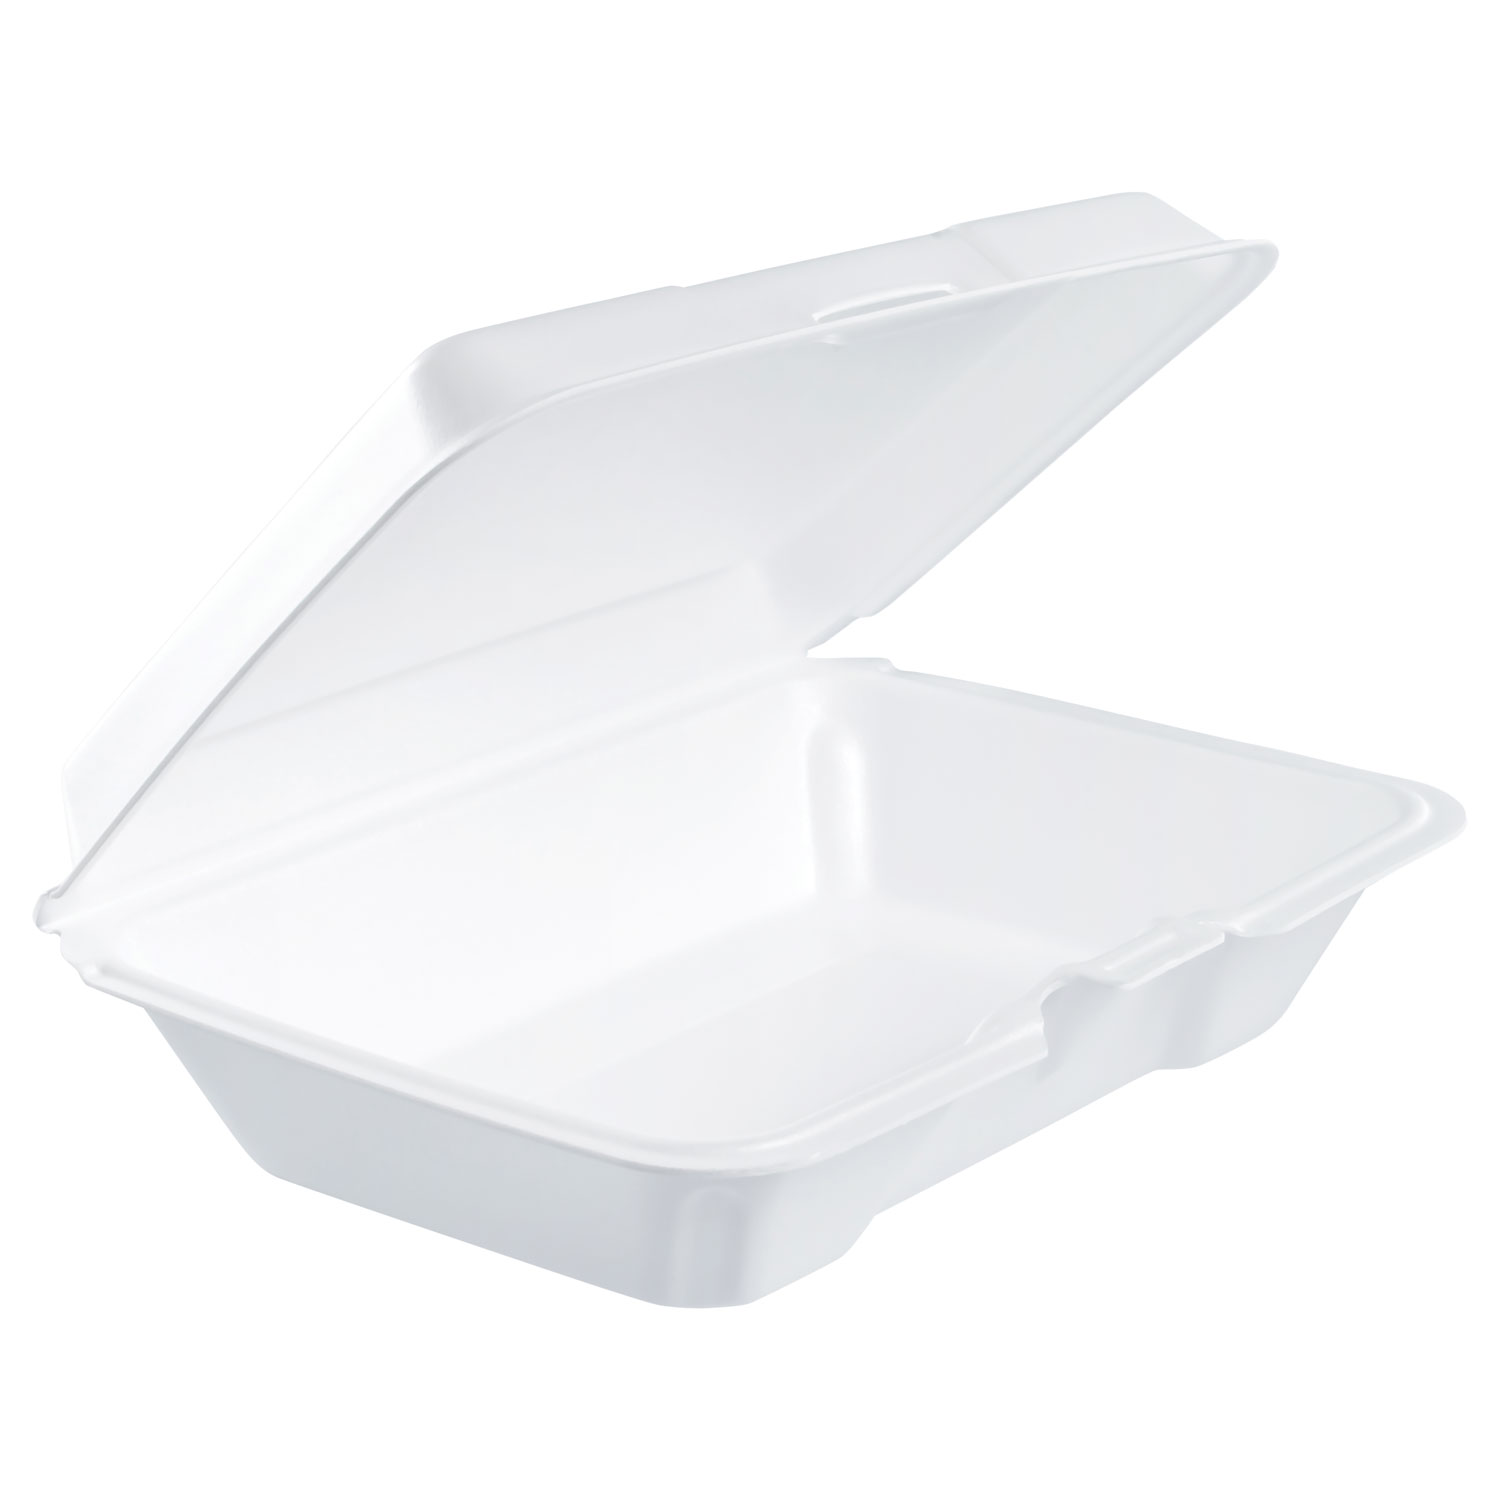 Foam Hinged Lid Containers, 6.4w x 9.3d x 2.6h, White, 200/Carton